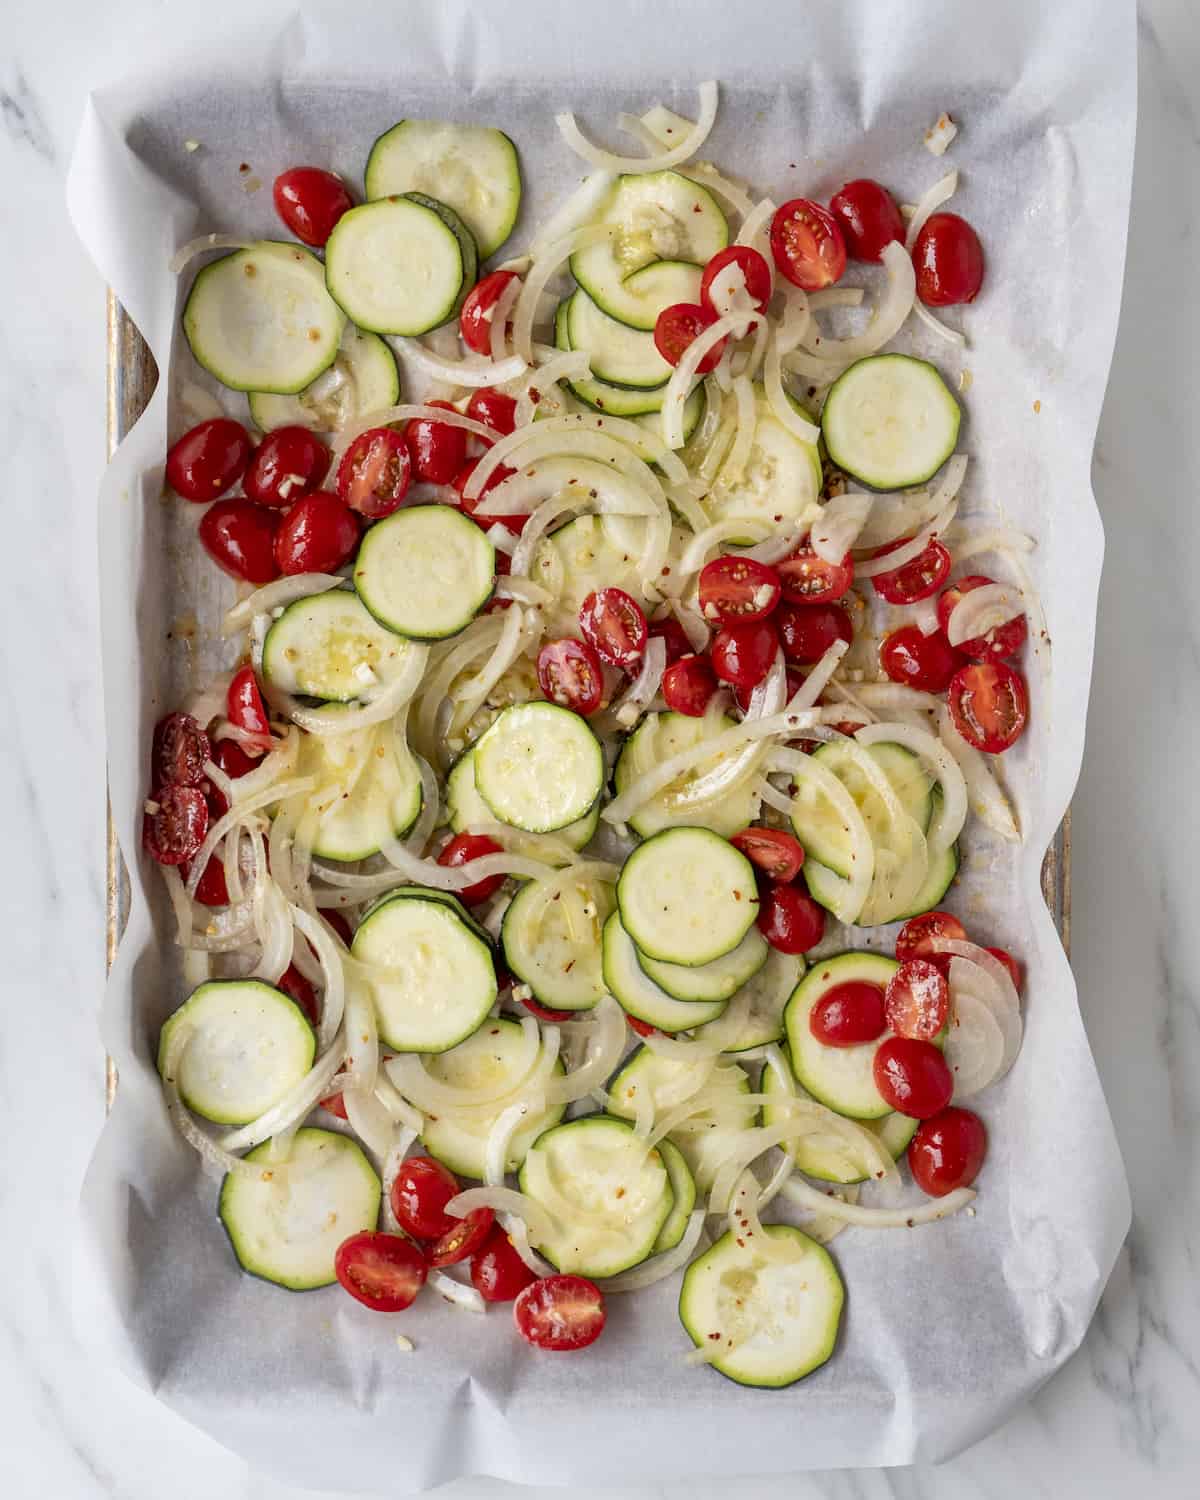 A sheet pan lined with parchment paper of sliced zucchini, yellow onion, cherry tomatoes, and drizzled with olive oil. 